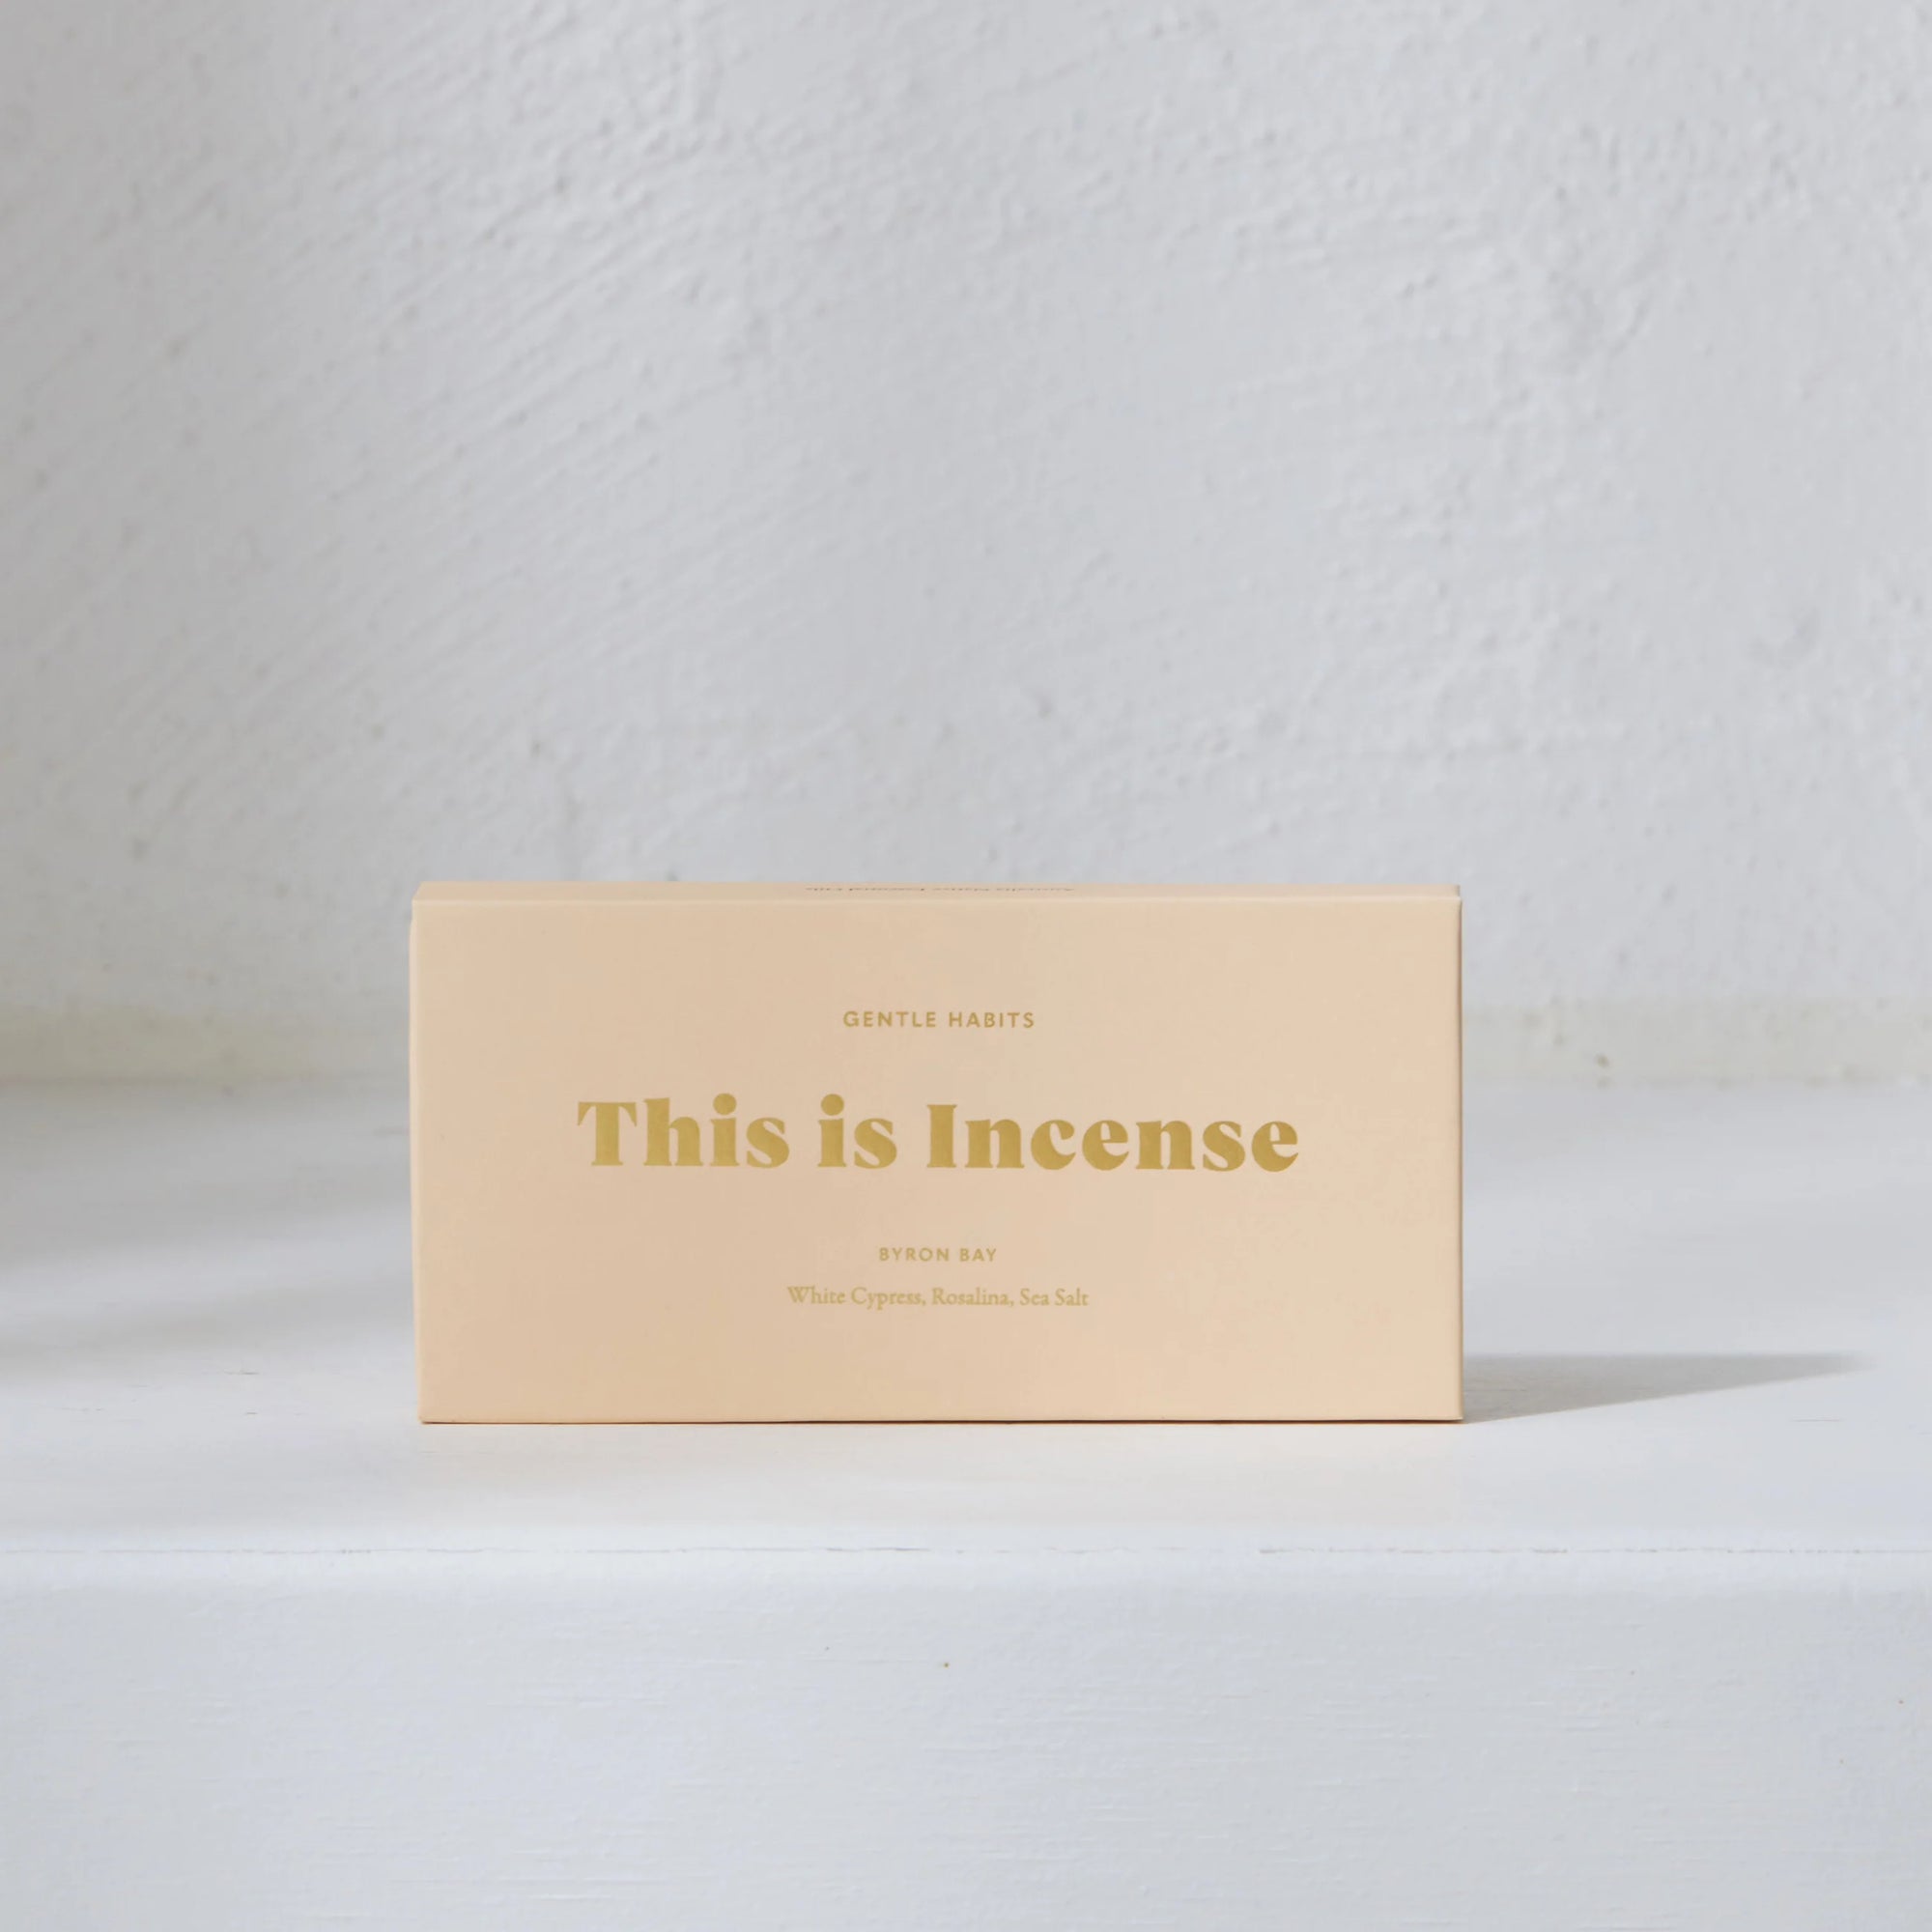 THIS IS INCENSE: BYRON BAY